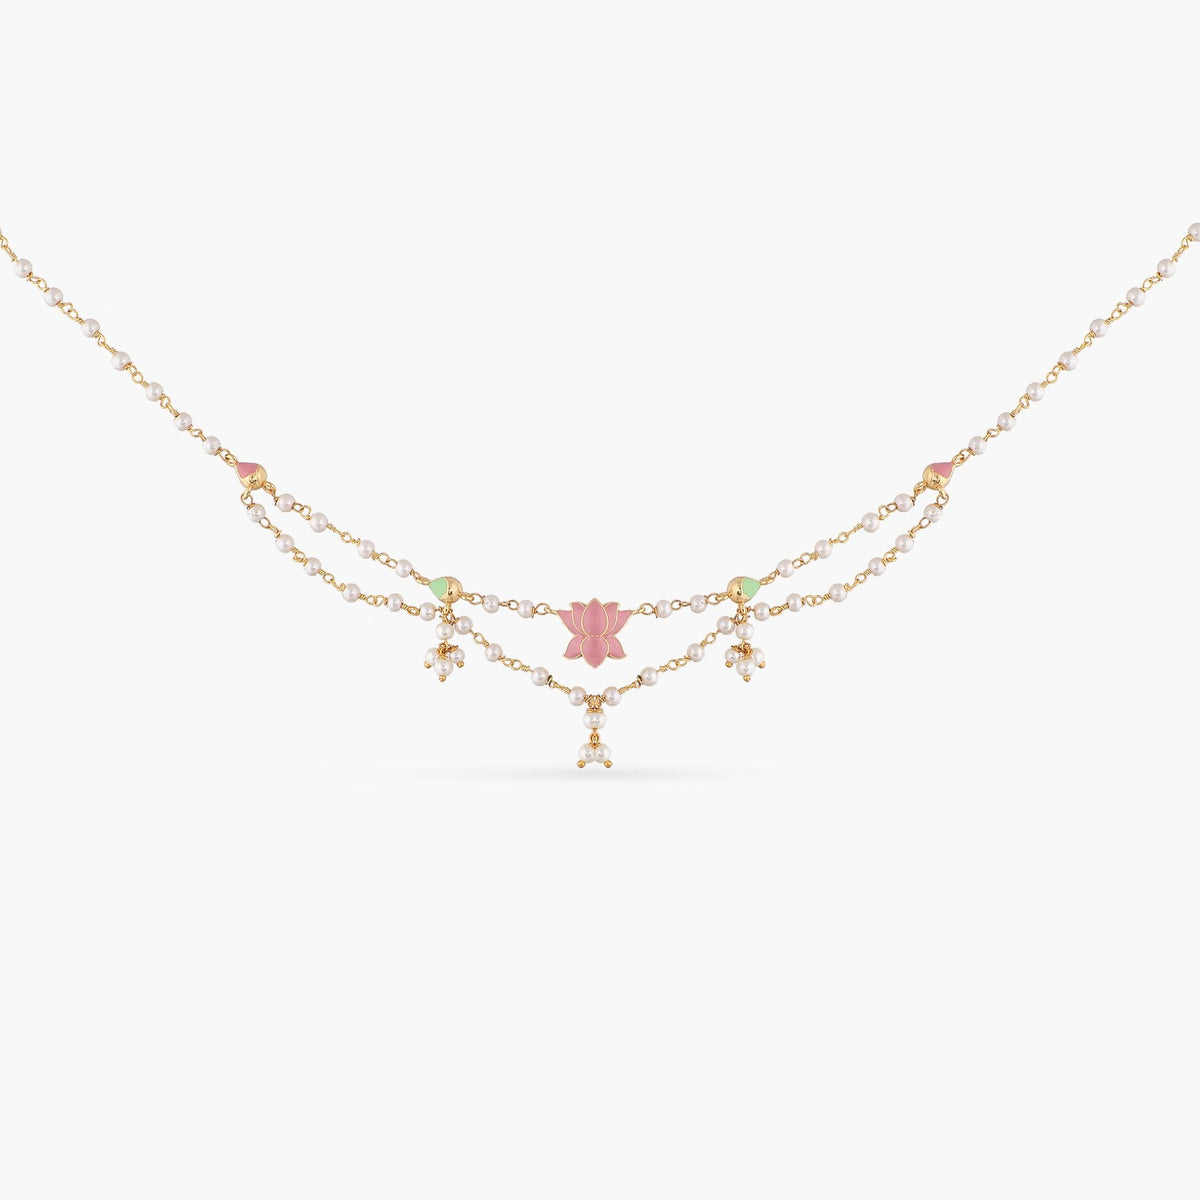 A picture of an Indian artificial layered necklace set with lotus pendant and a gold-toned chain. The earrings are stud style with matching white stones.